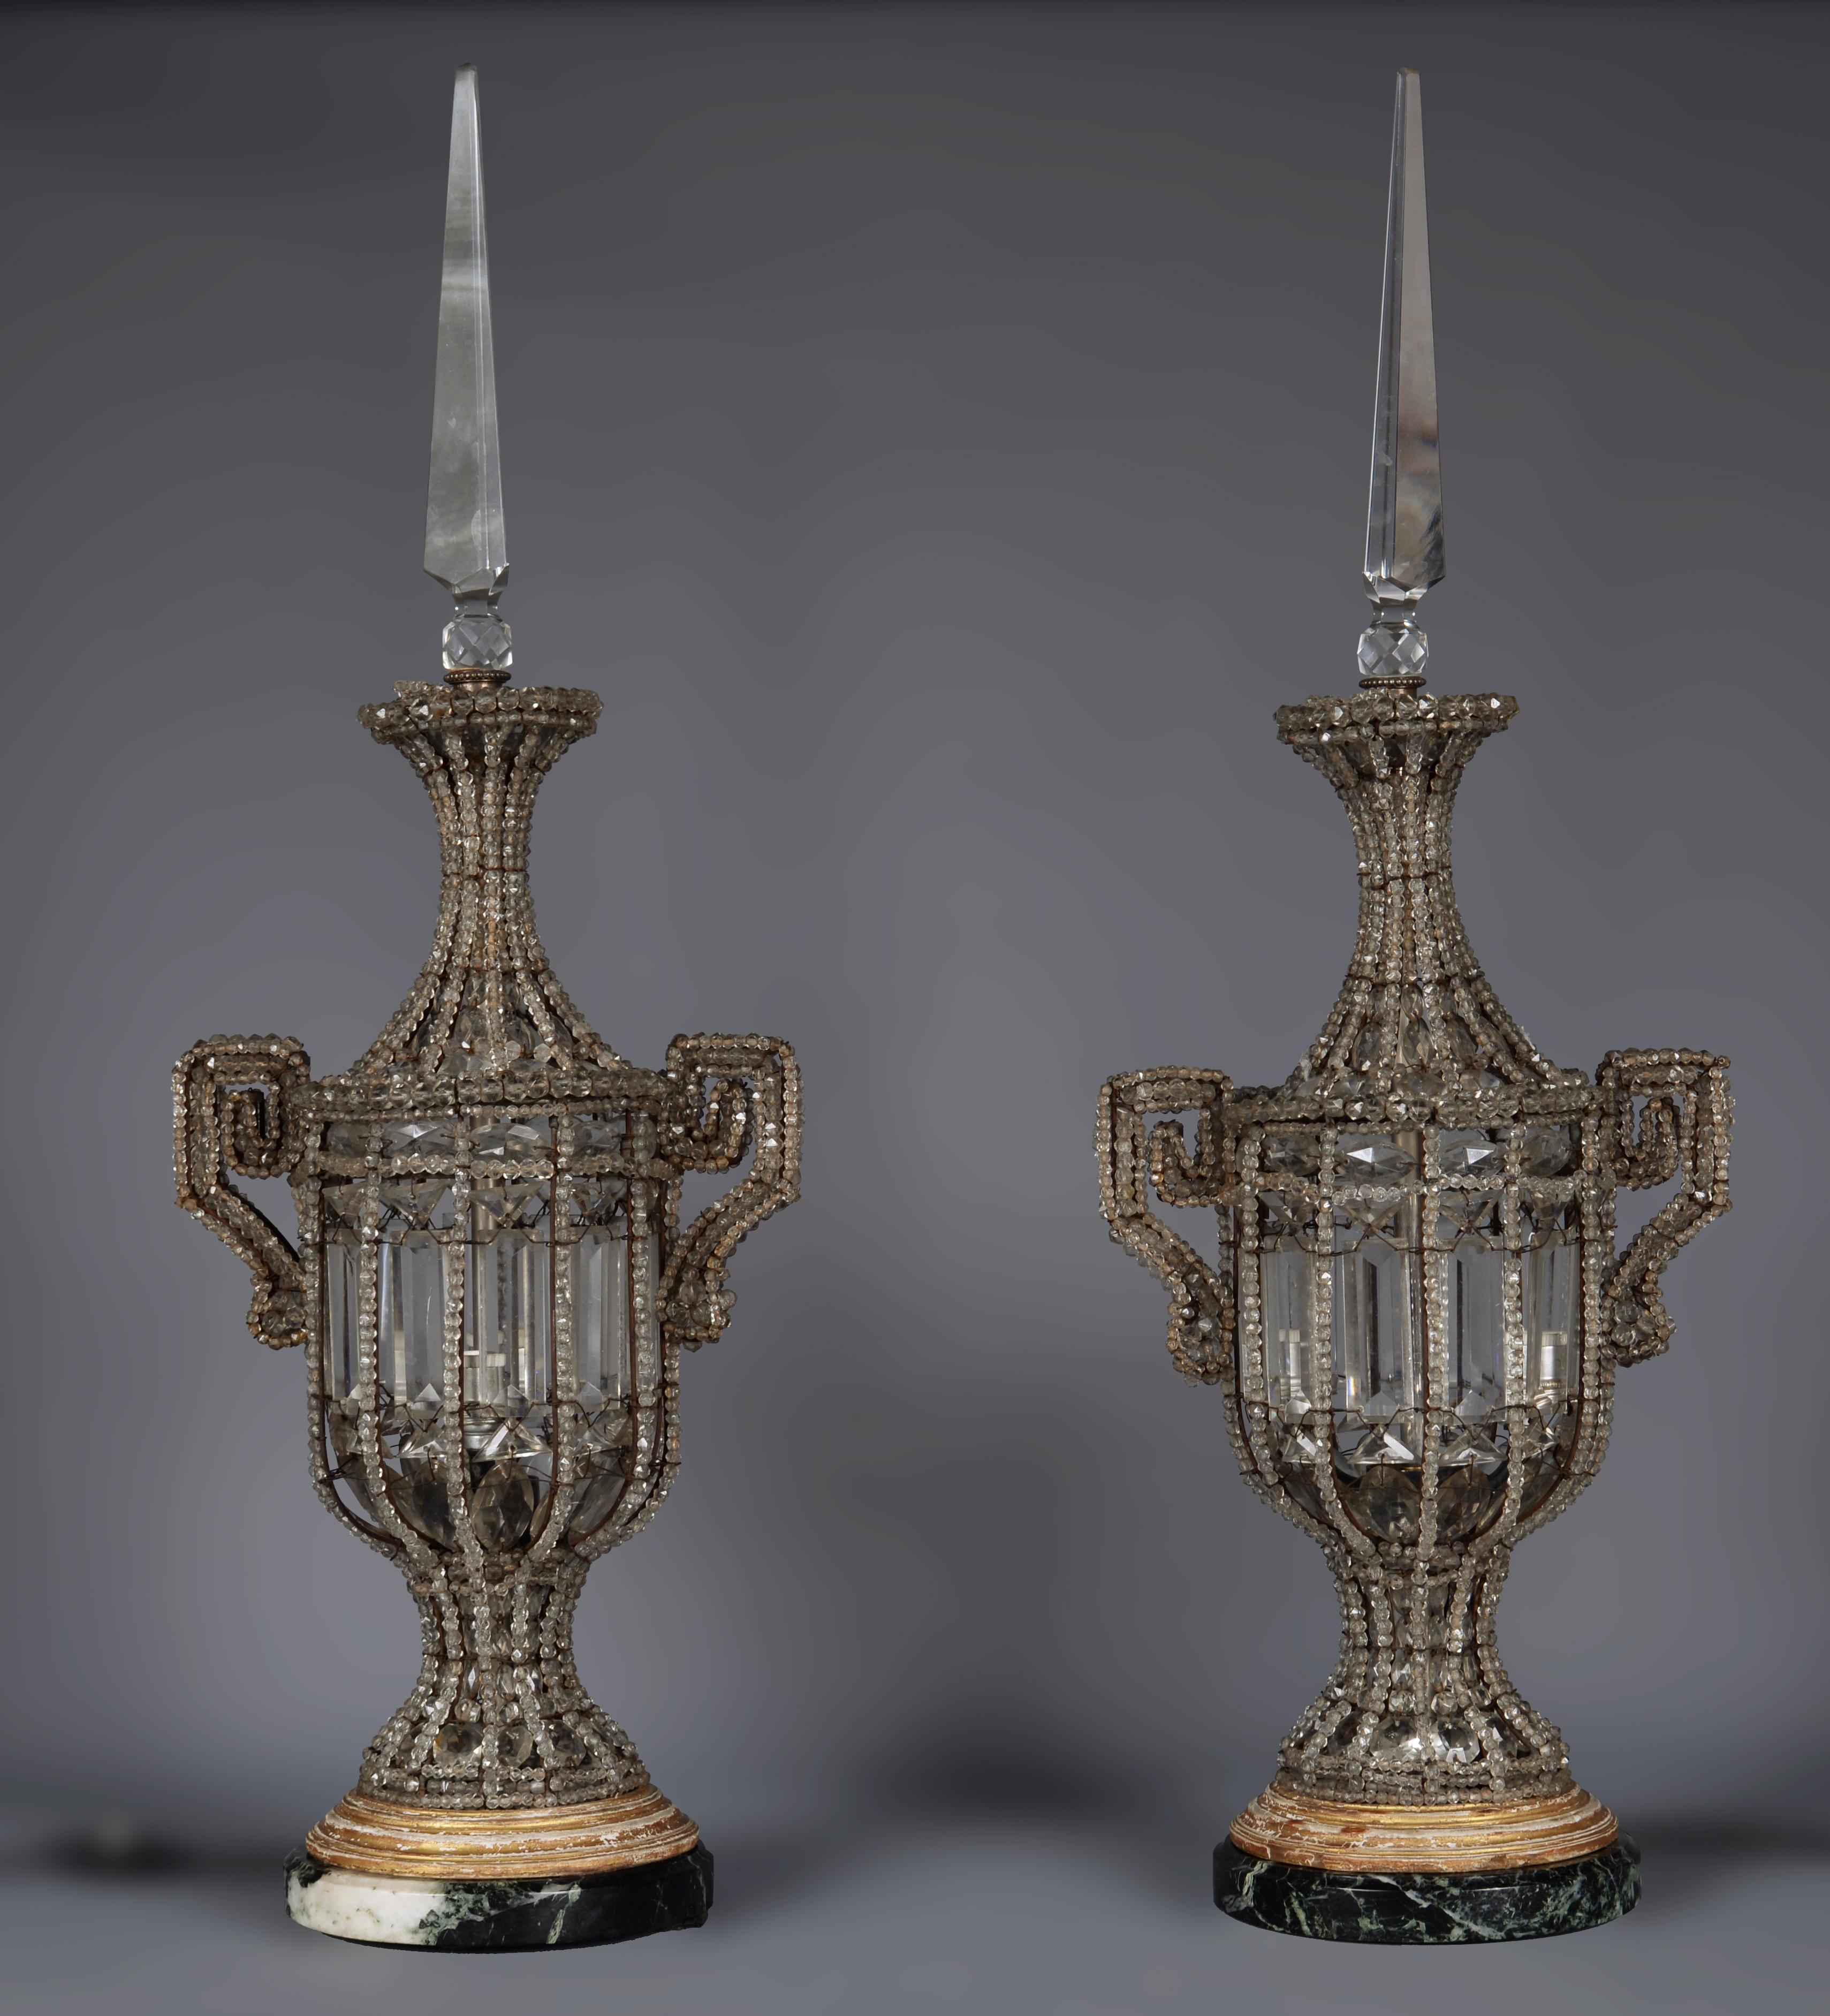 This beautiful pair of lamps was made of crystal in the late 19th century, early 20th
The lamps are composed of crystal pendants of different shapes and sizes attached together by iron strings, thus taking the shape of splendid vases flanked with